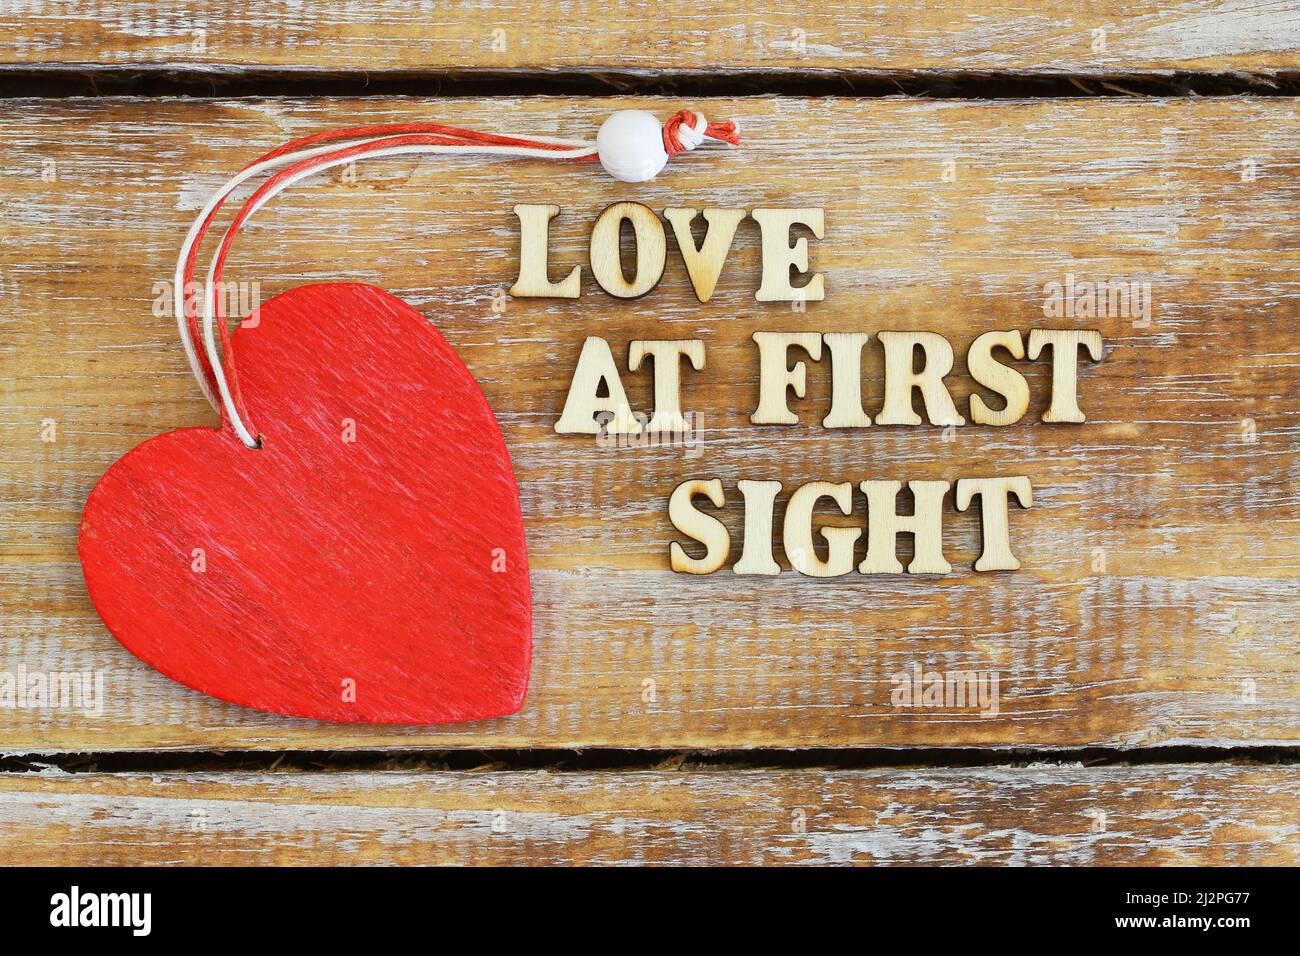 Love at first sight written with wooden letters on rustic surface and red wooden heart Stock Photo